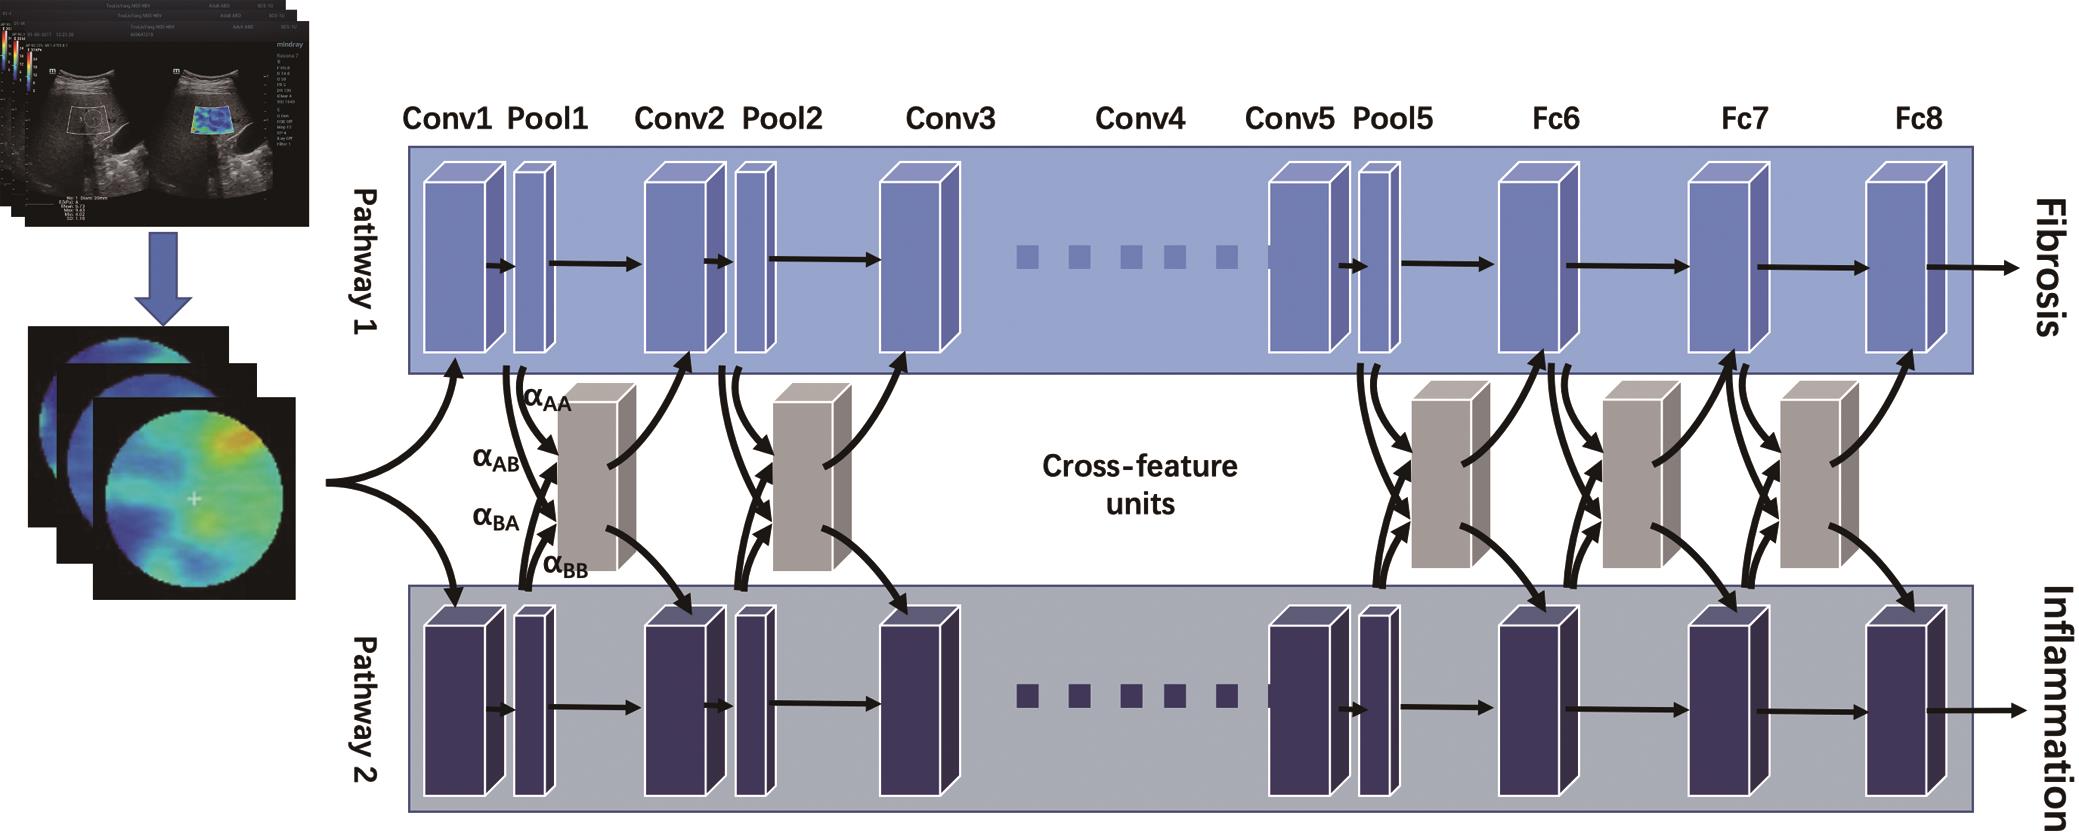 Illustration of the dual-task convolutional neural network (DtCNN) model for liver fibrosis and inflammation staging.